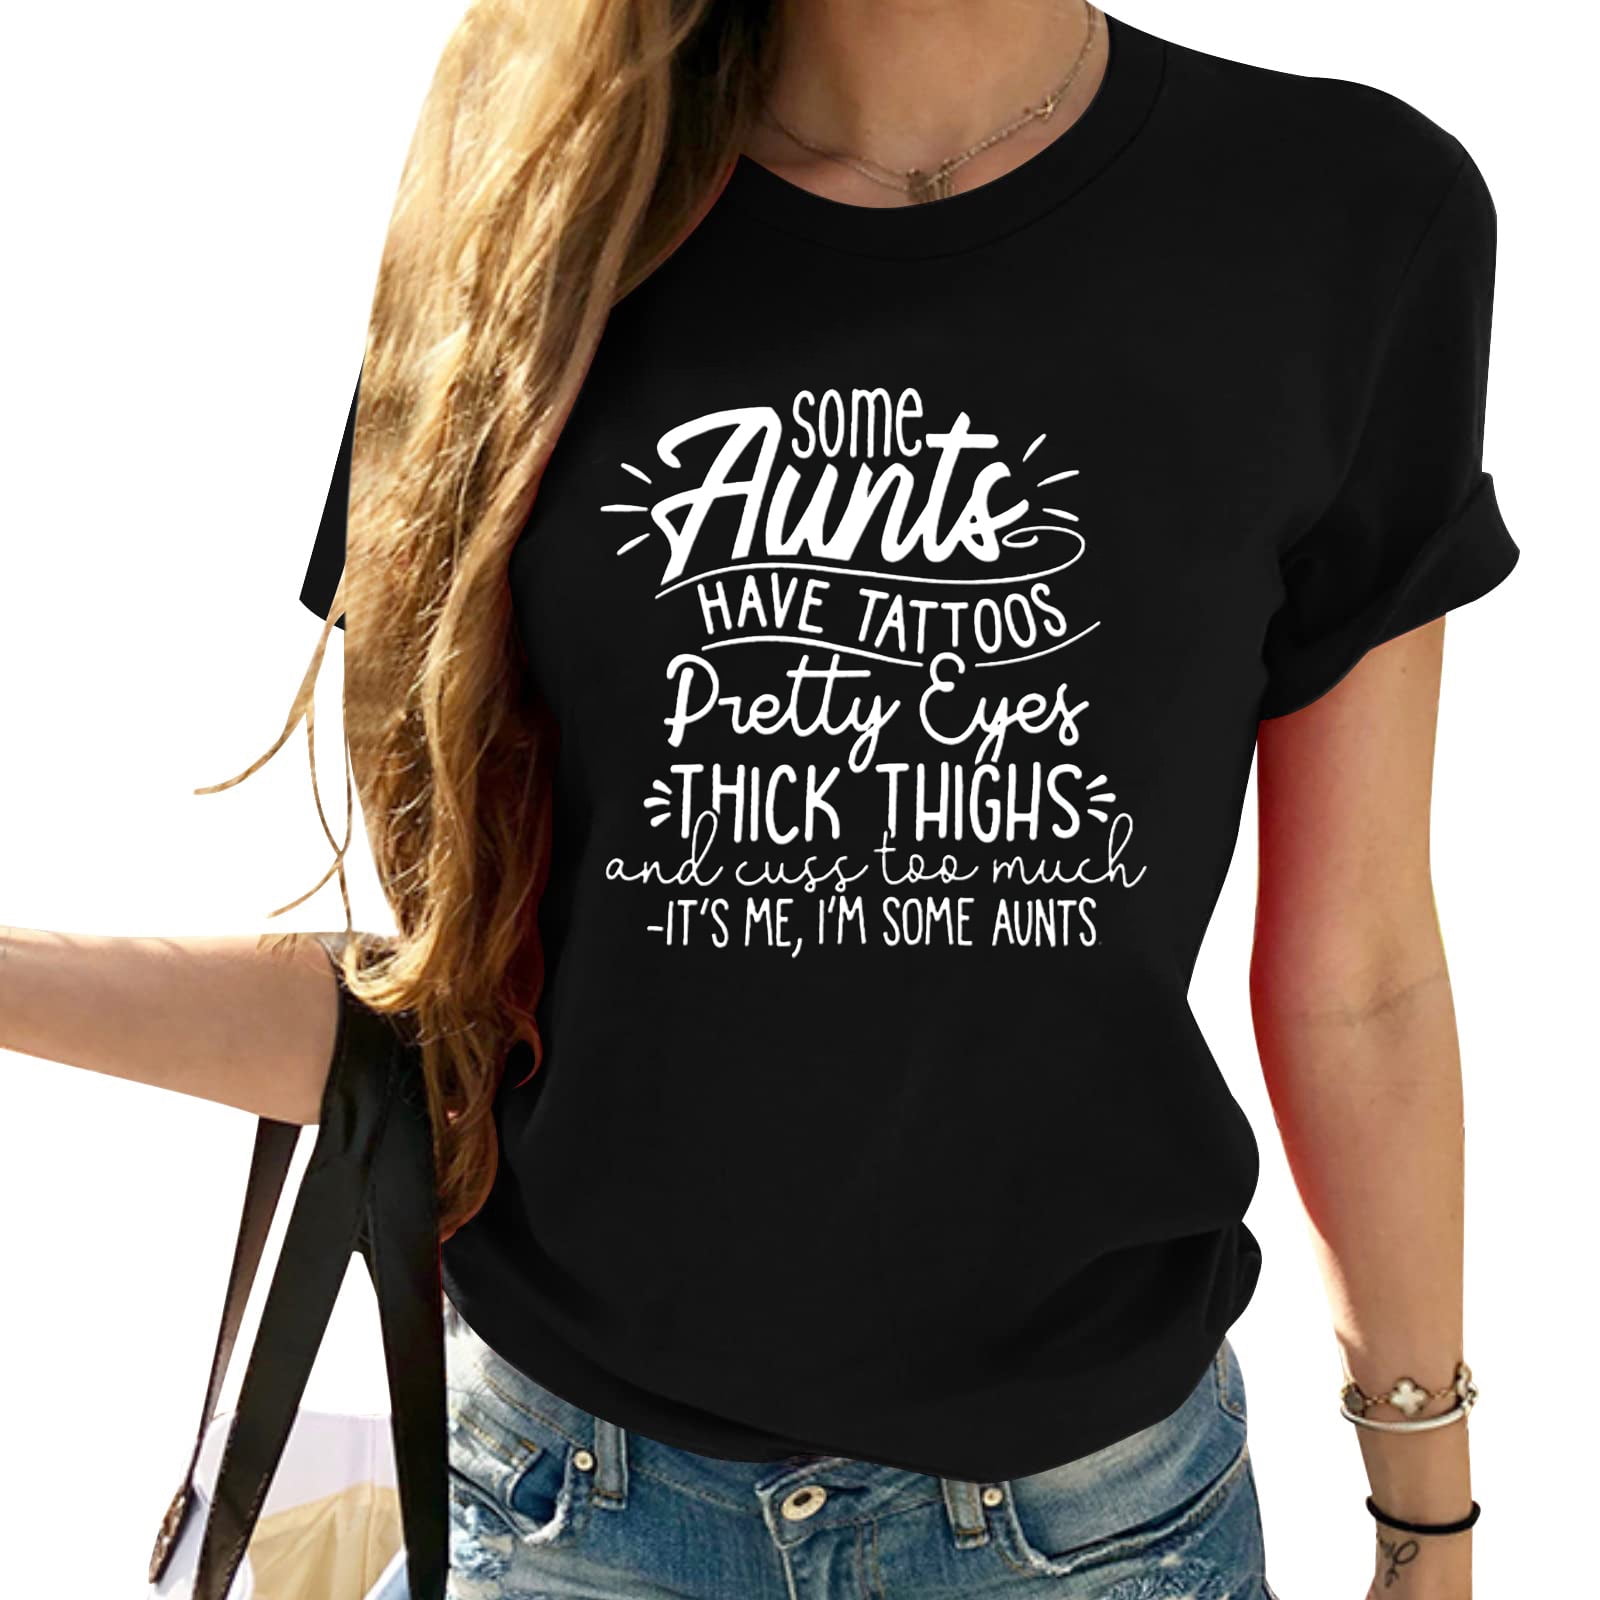 TWZH Women SOME MOMS CUSS TOO MUCH Letter Printed Crew Neck Casual T-Shirts  